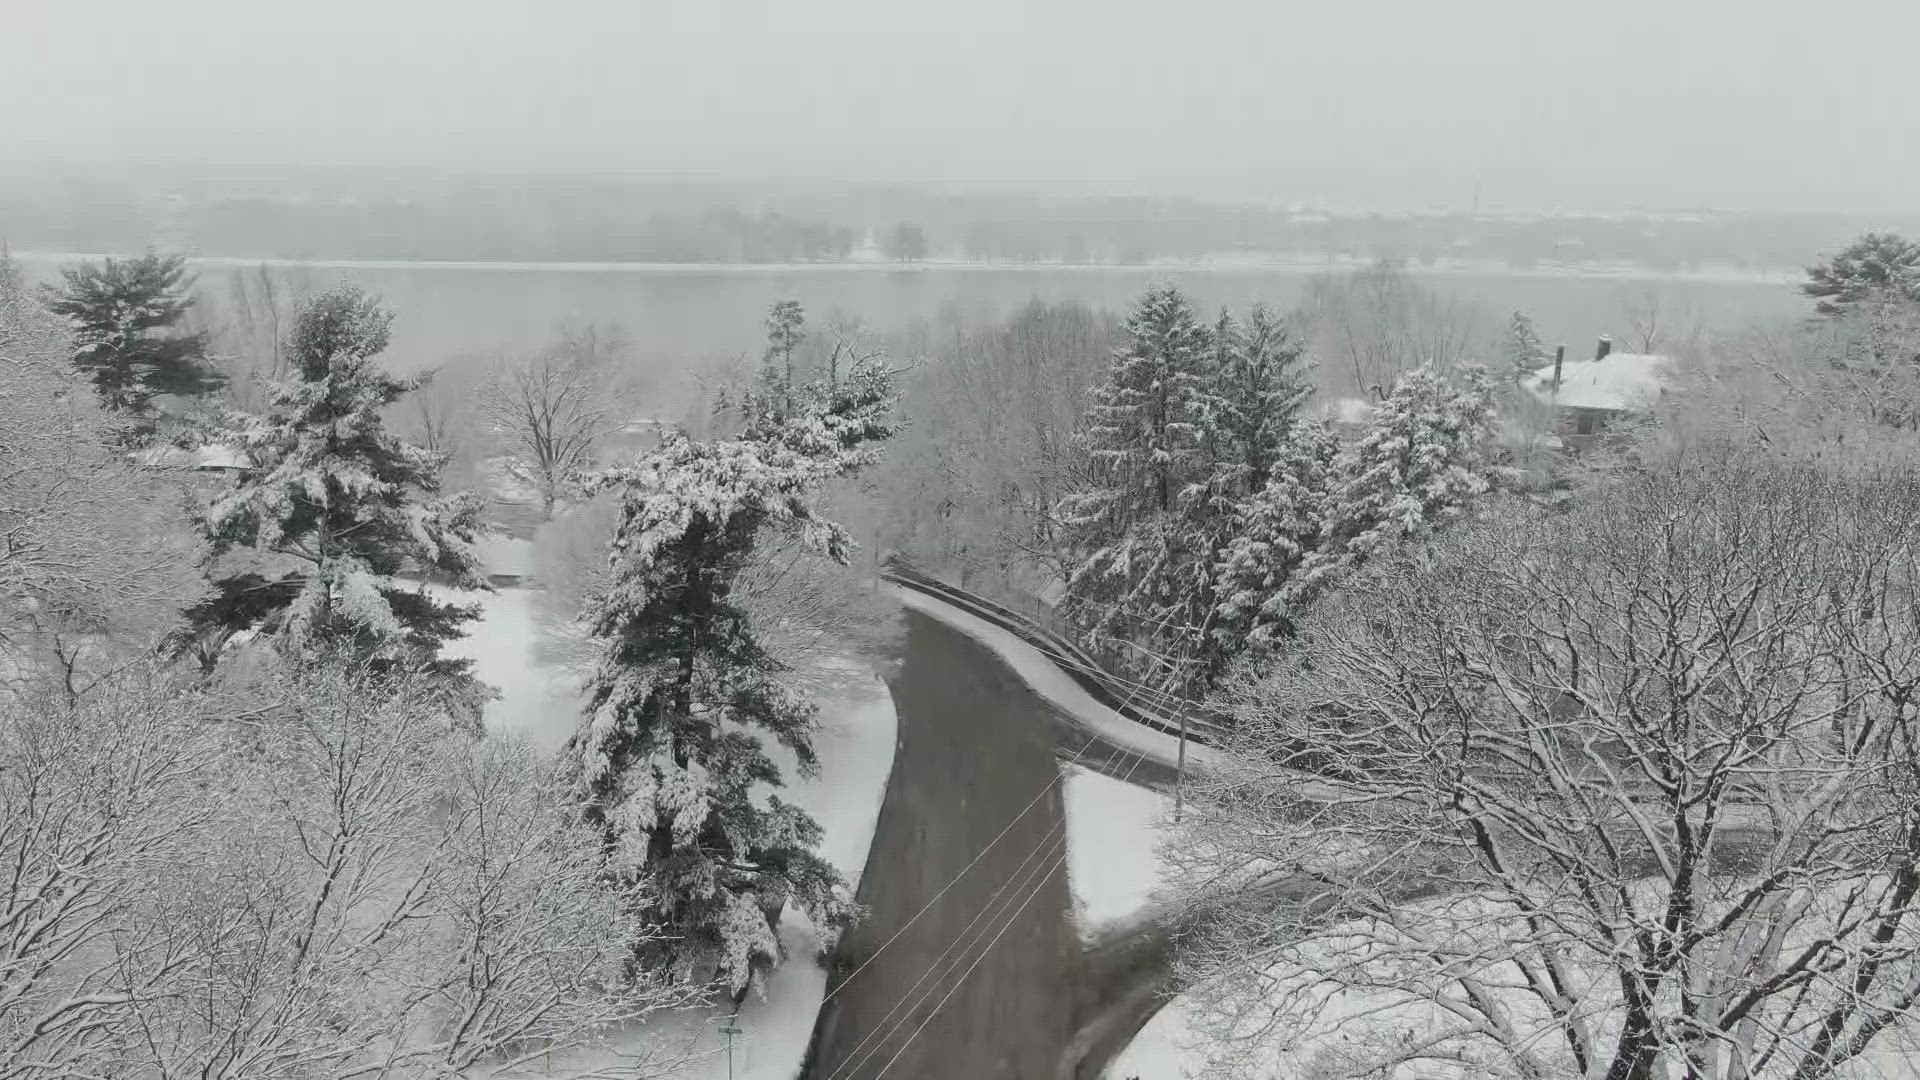 Our drone took to the skies to capture a gentle snowfall over the Quad Cities on Jan. 25, 2023.